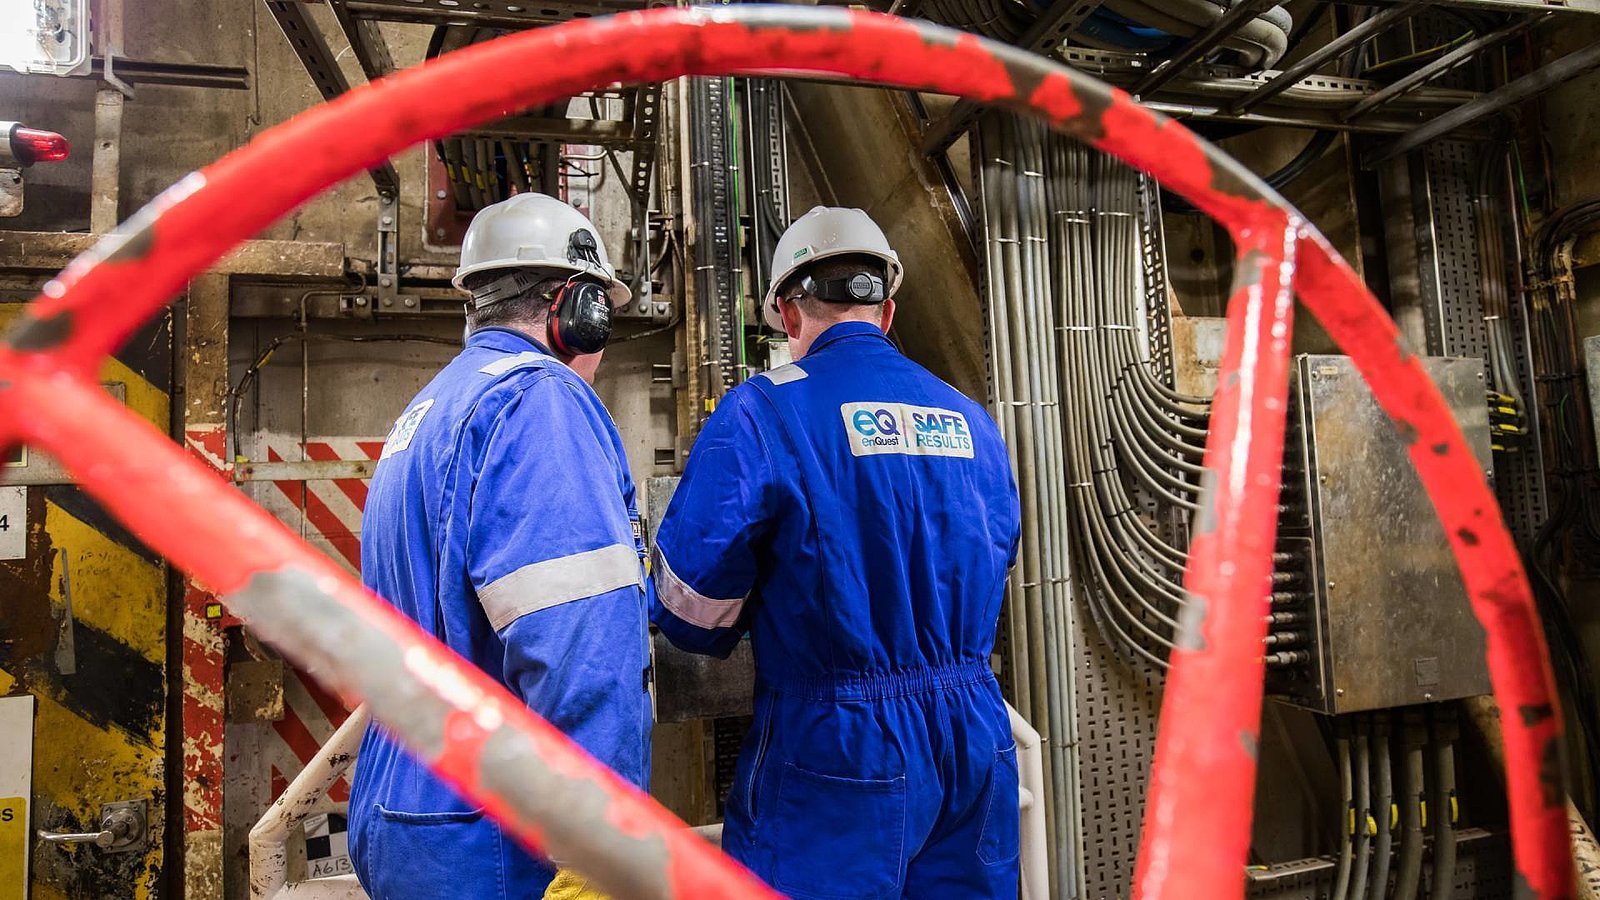 Oil & gas firm awarded offer of CO2 storage licenses in UK's first-ever such round